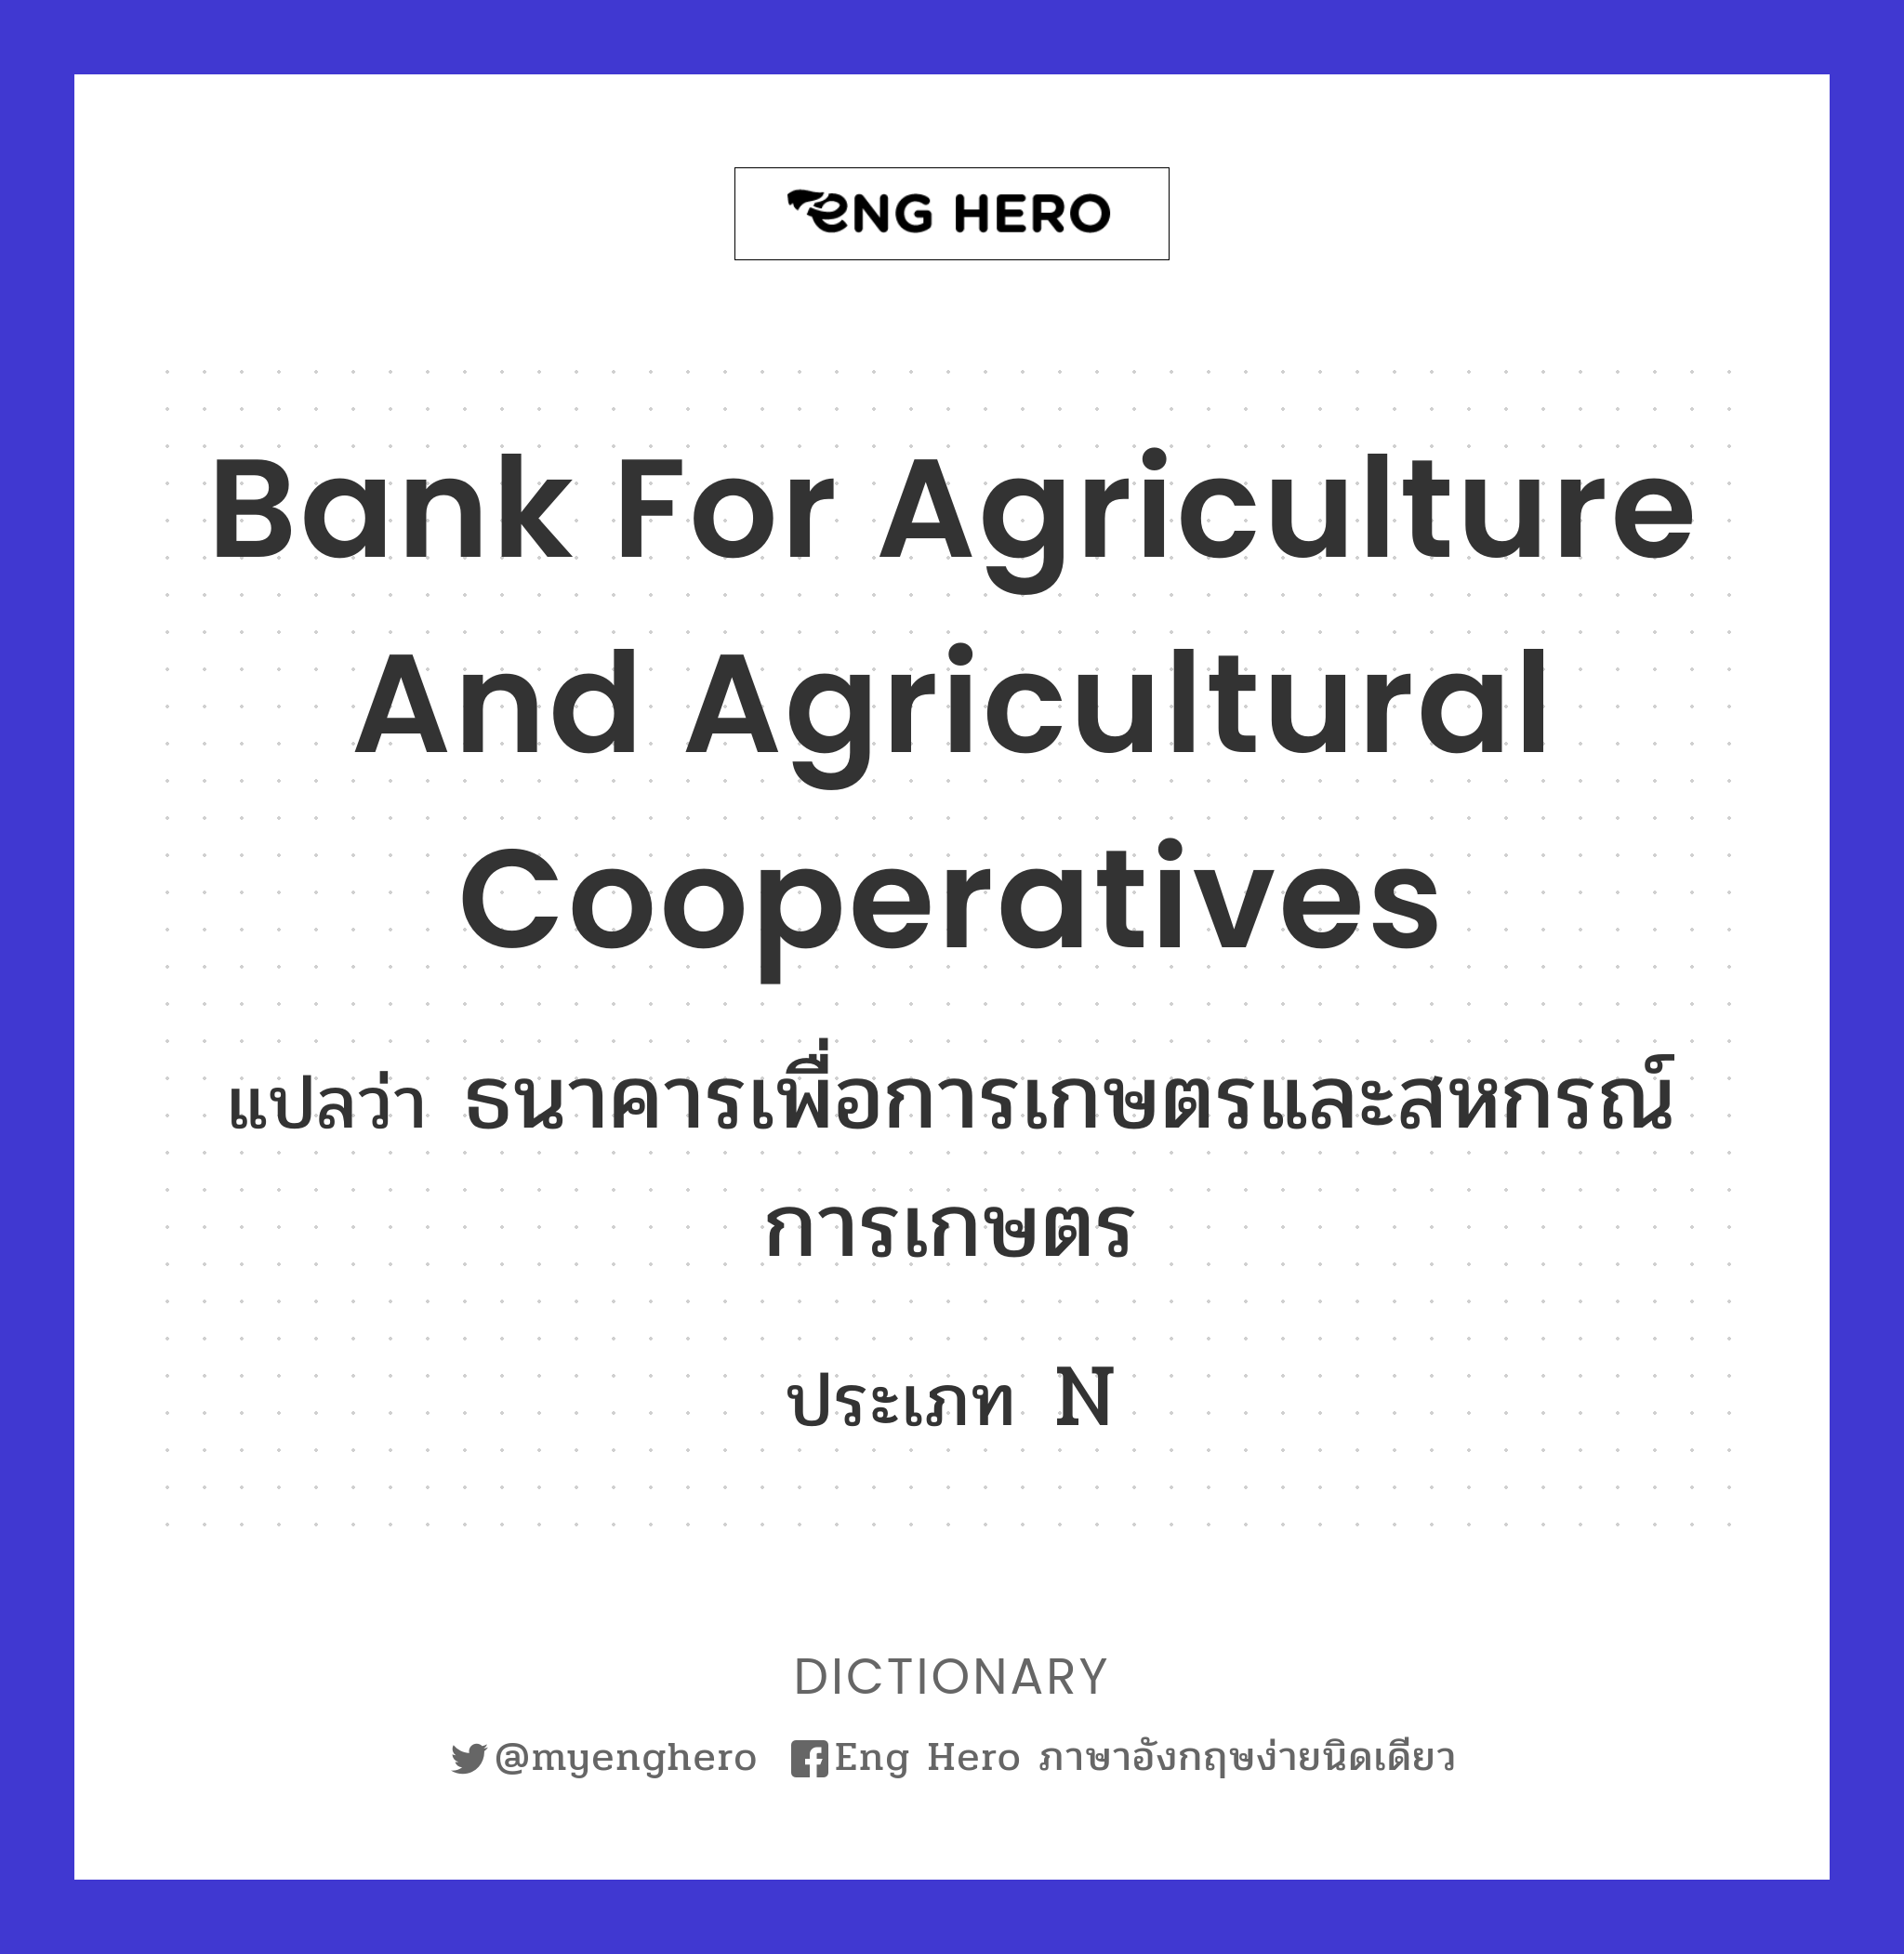 Bank for Agriculture and Agricultural Cooperatives